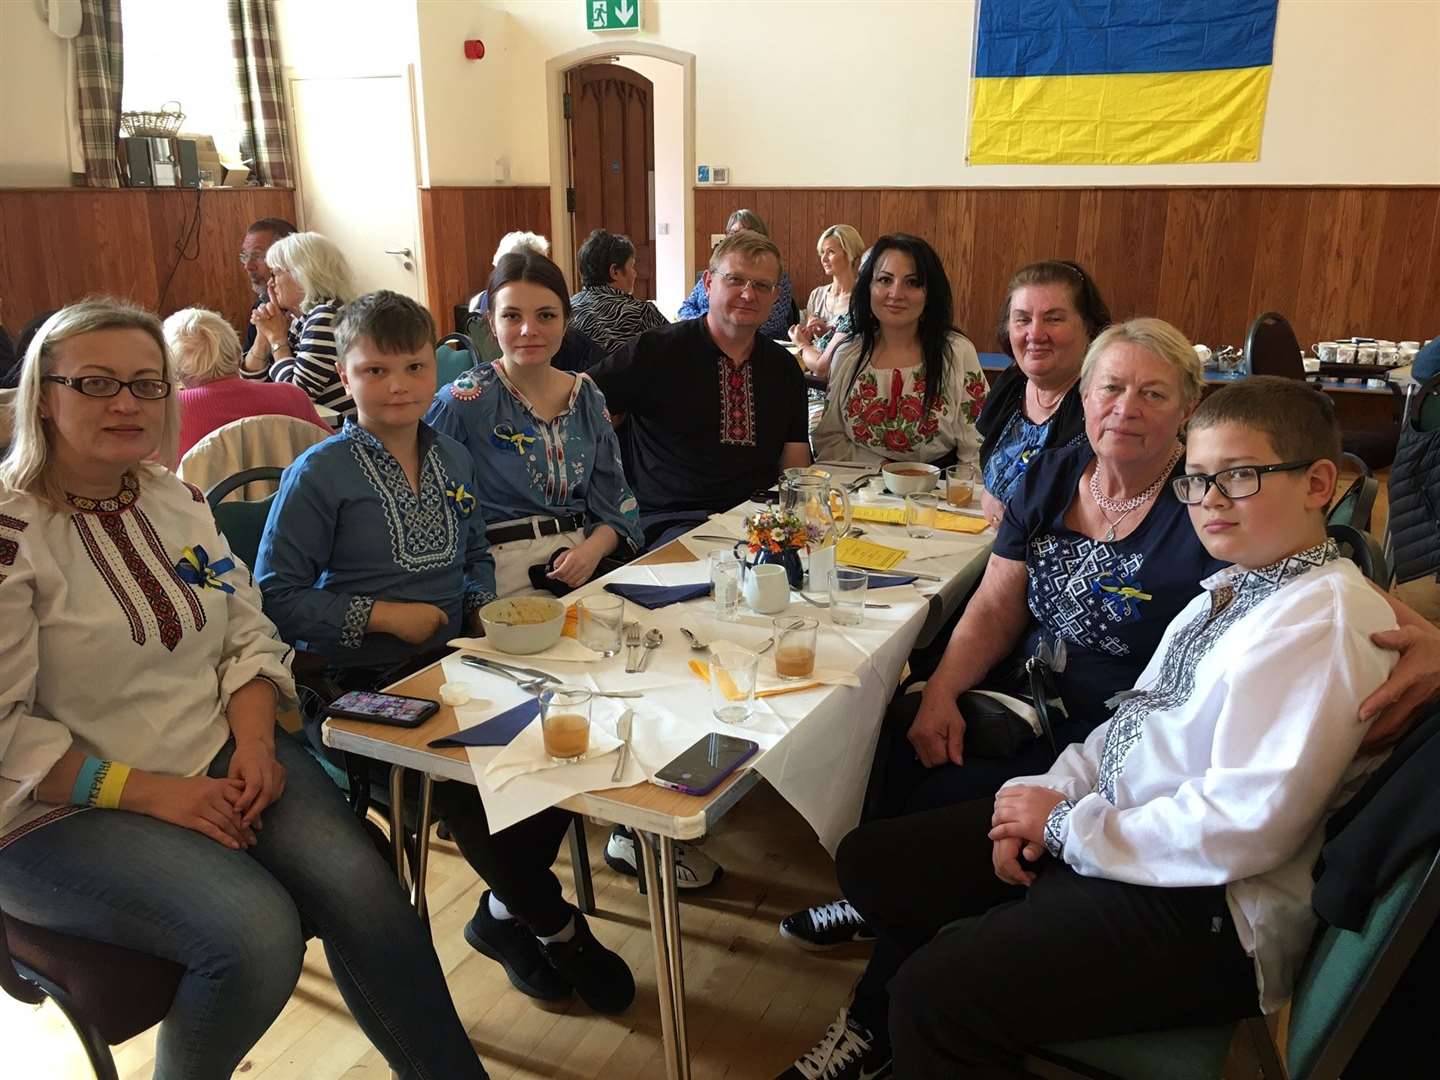 Nearly £1,000 was raised with all proceeds being donated to a Church of Scotland link church in Hungary where Ukrainian refuges are safe from the war.